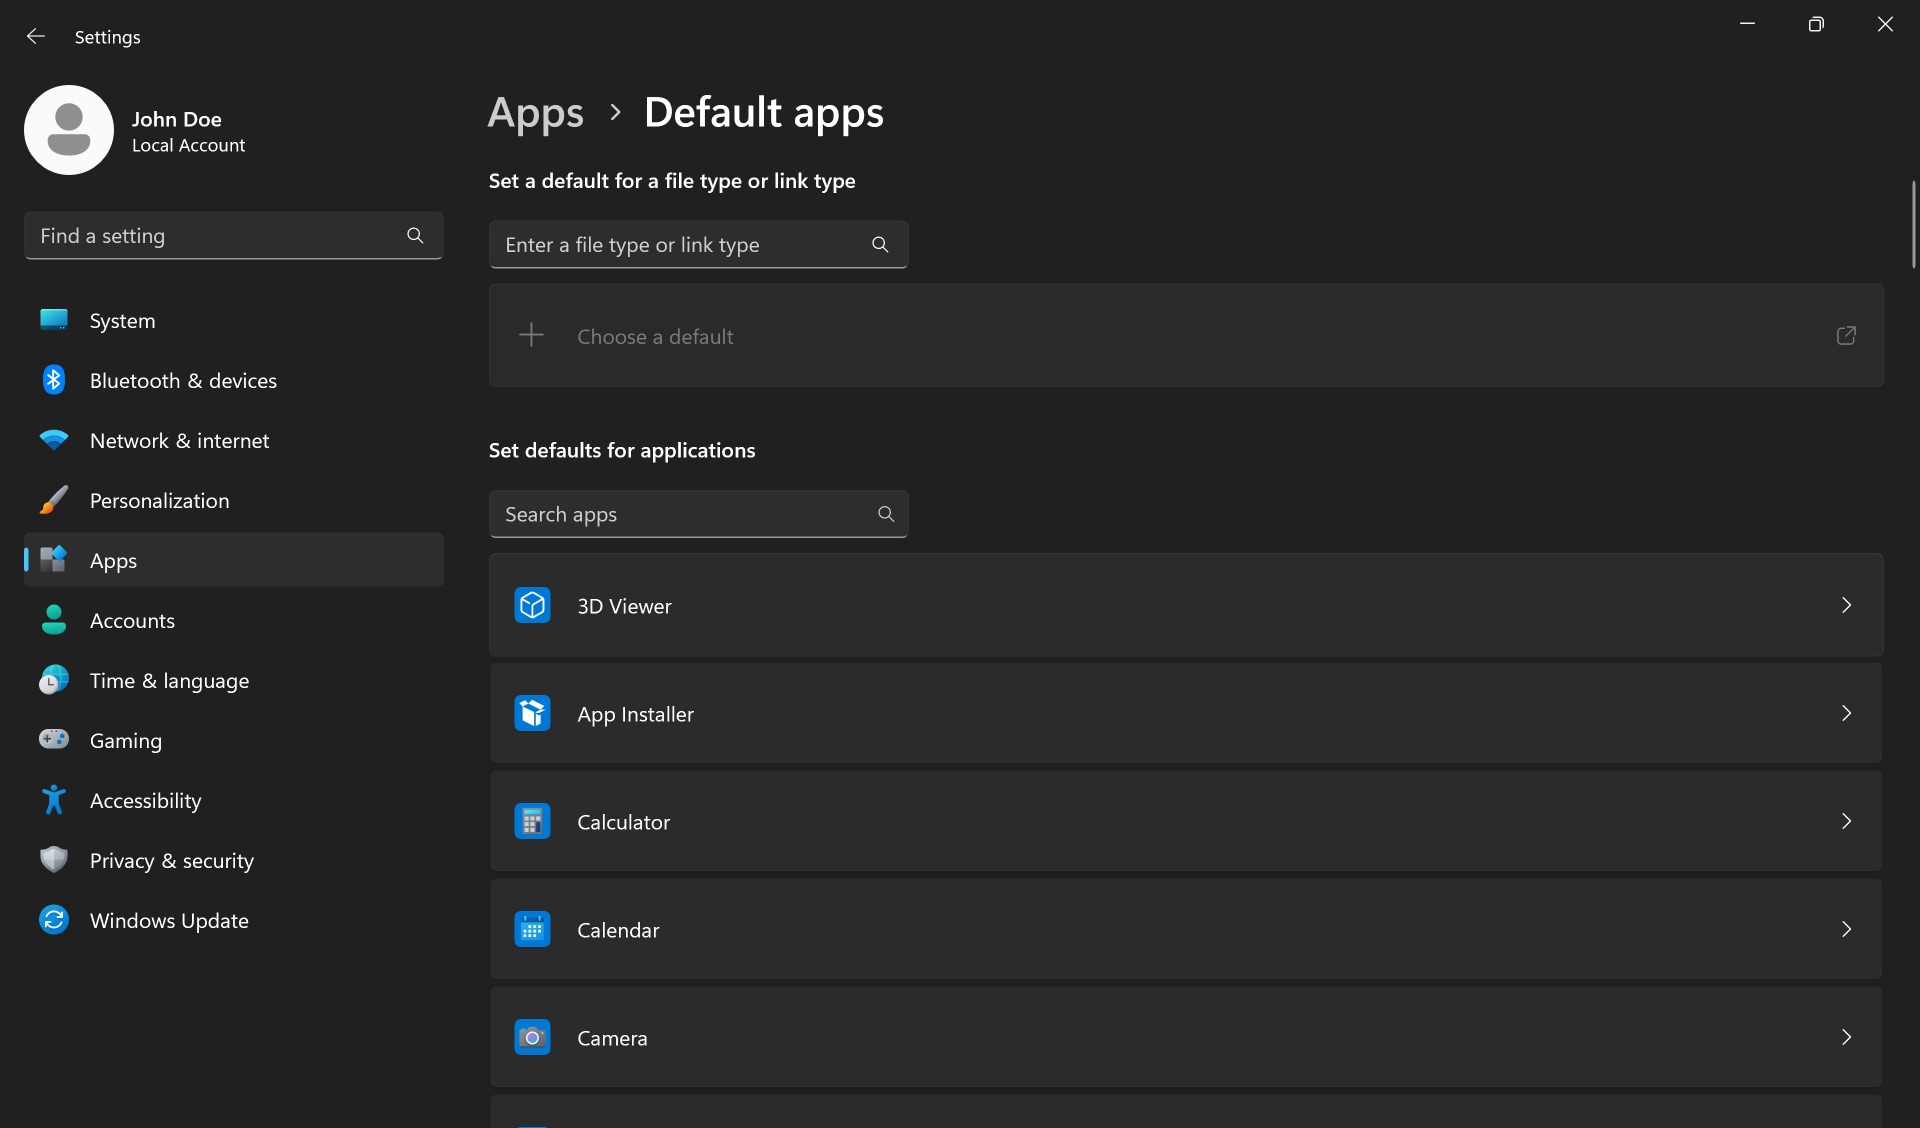 Set defaults for file type or application under the Default apps settings in Windows